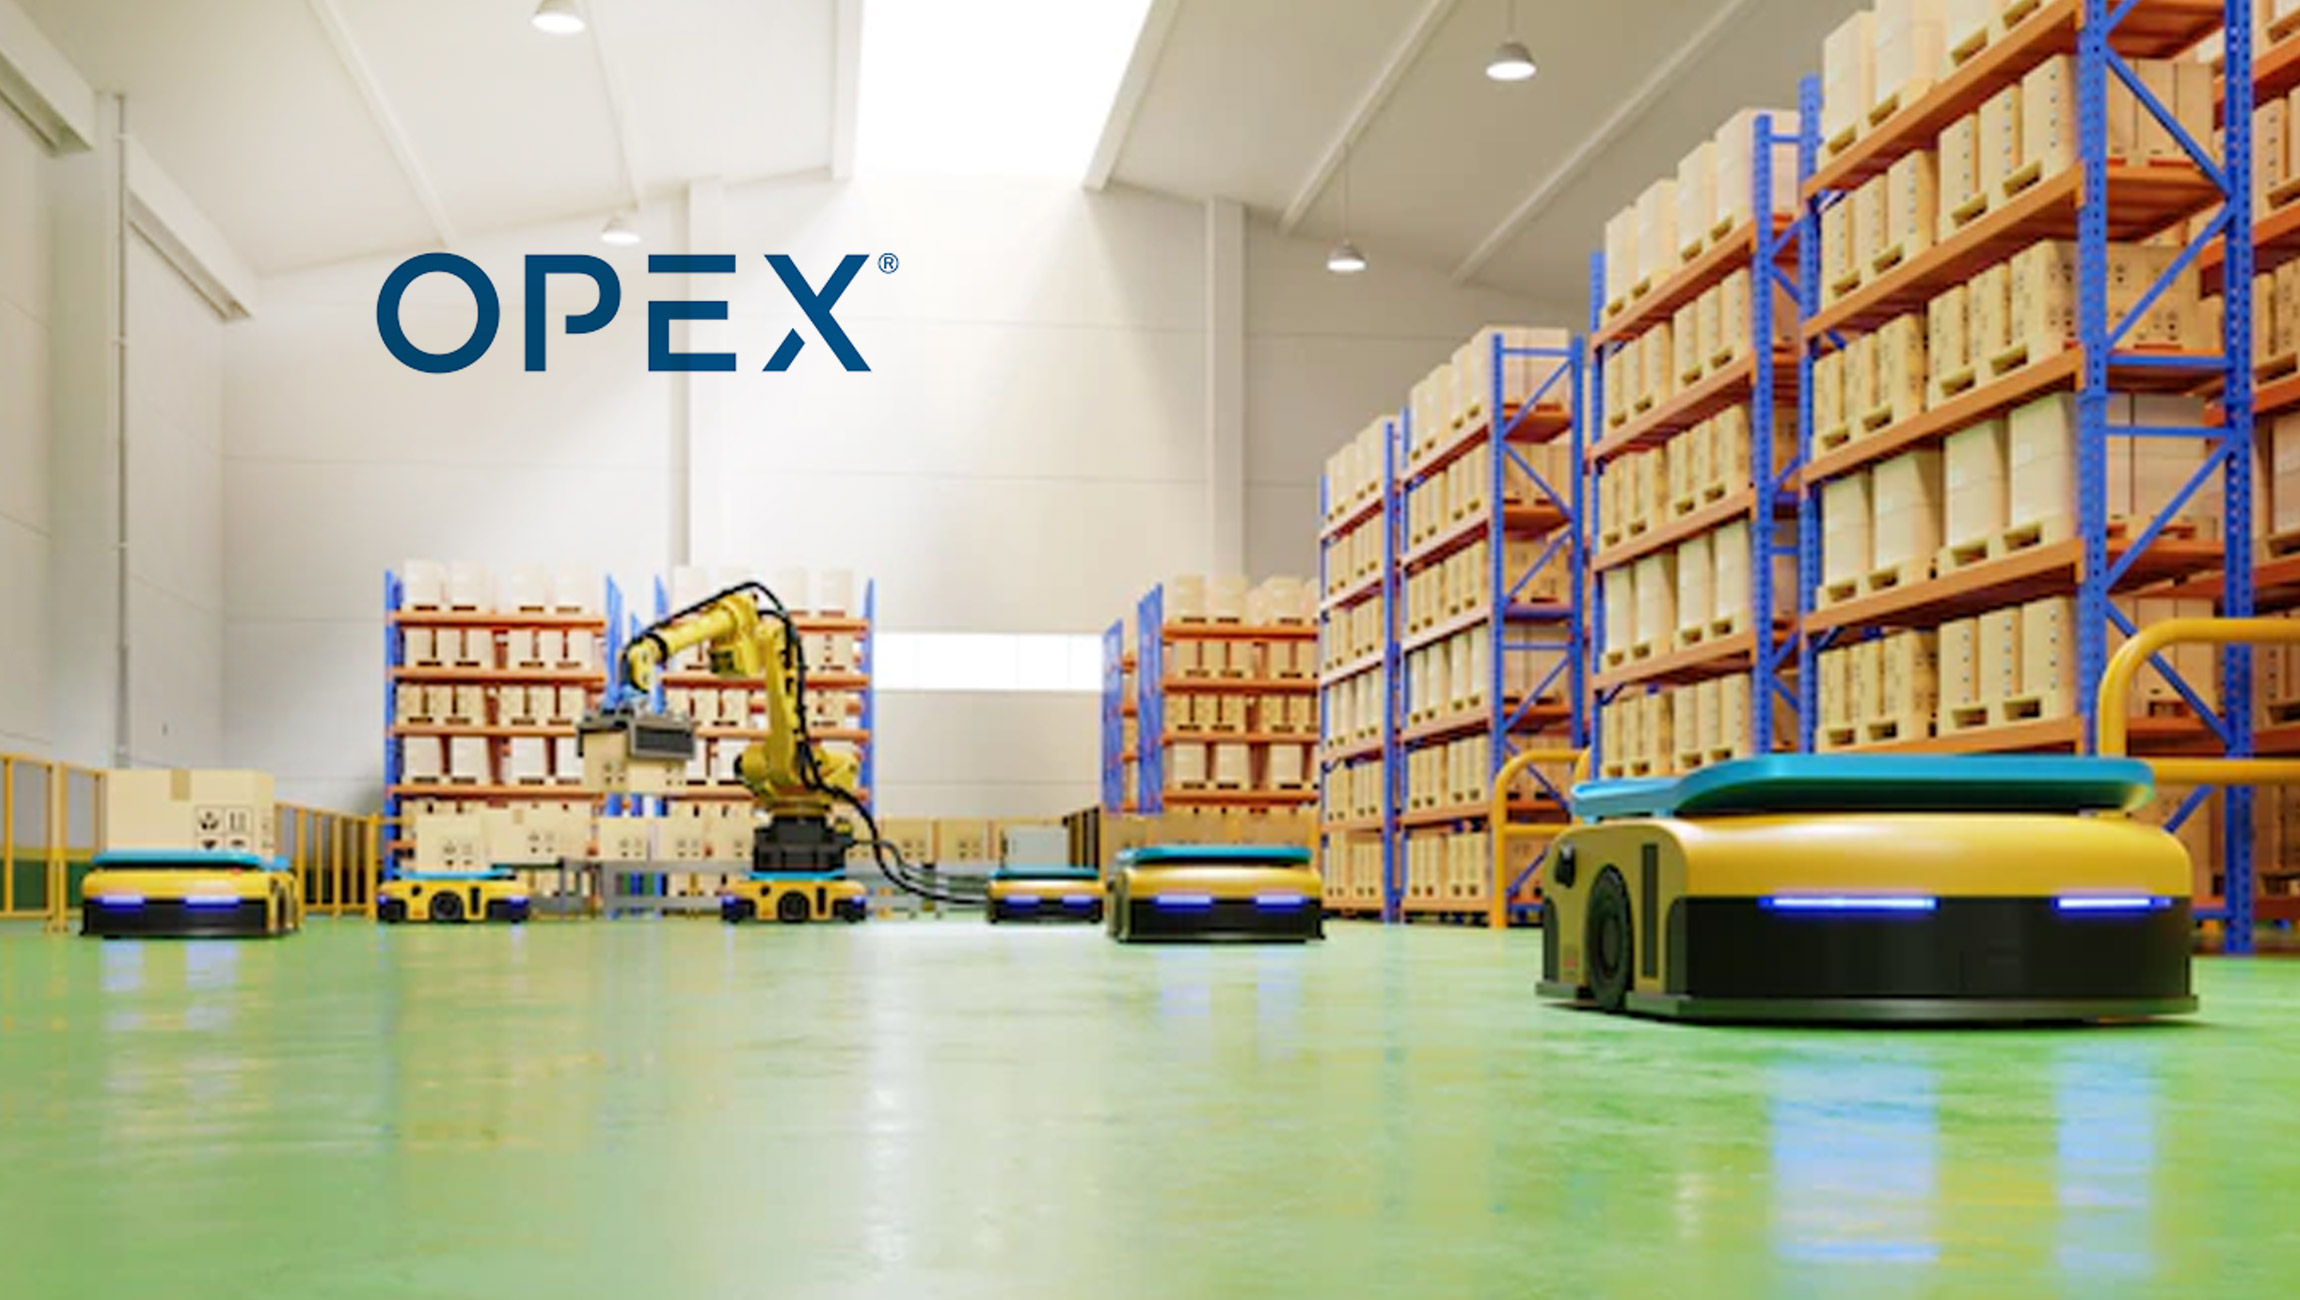 OPEX® to Exhibit Warehouse Automation Solutions at UK Event for Supply Chain and Logistics Professionals